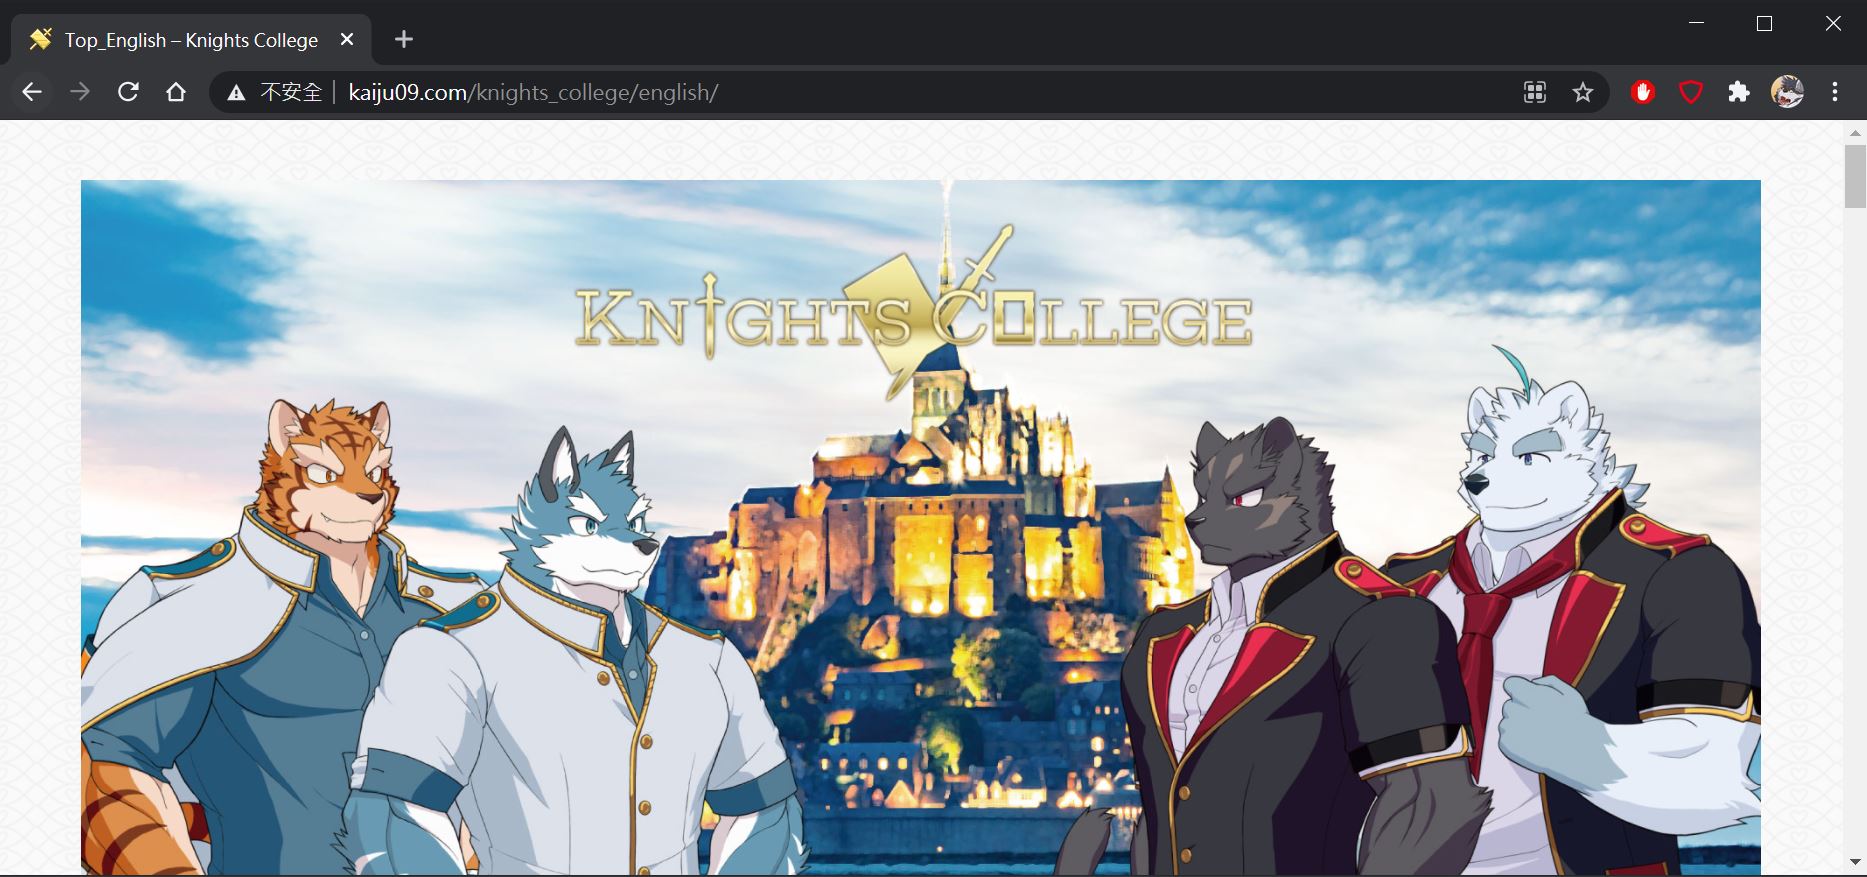 Knights College R18 content extension process